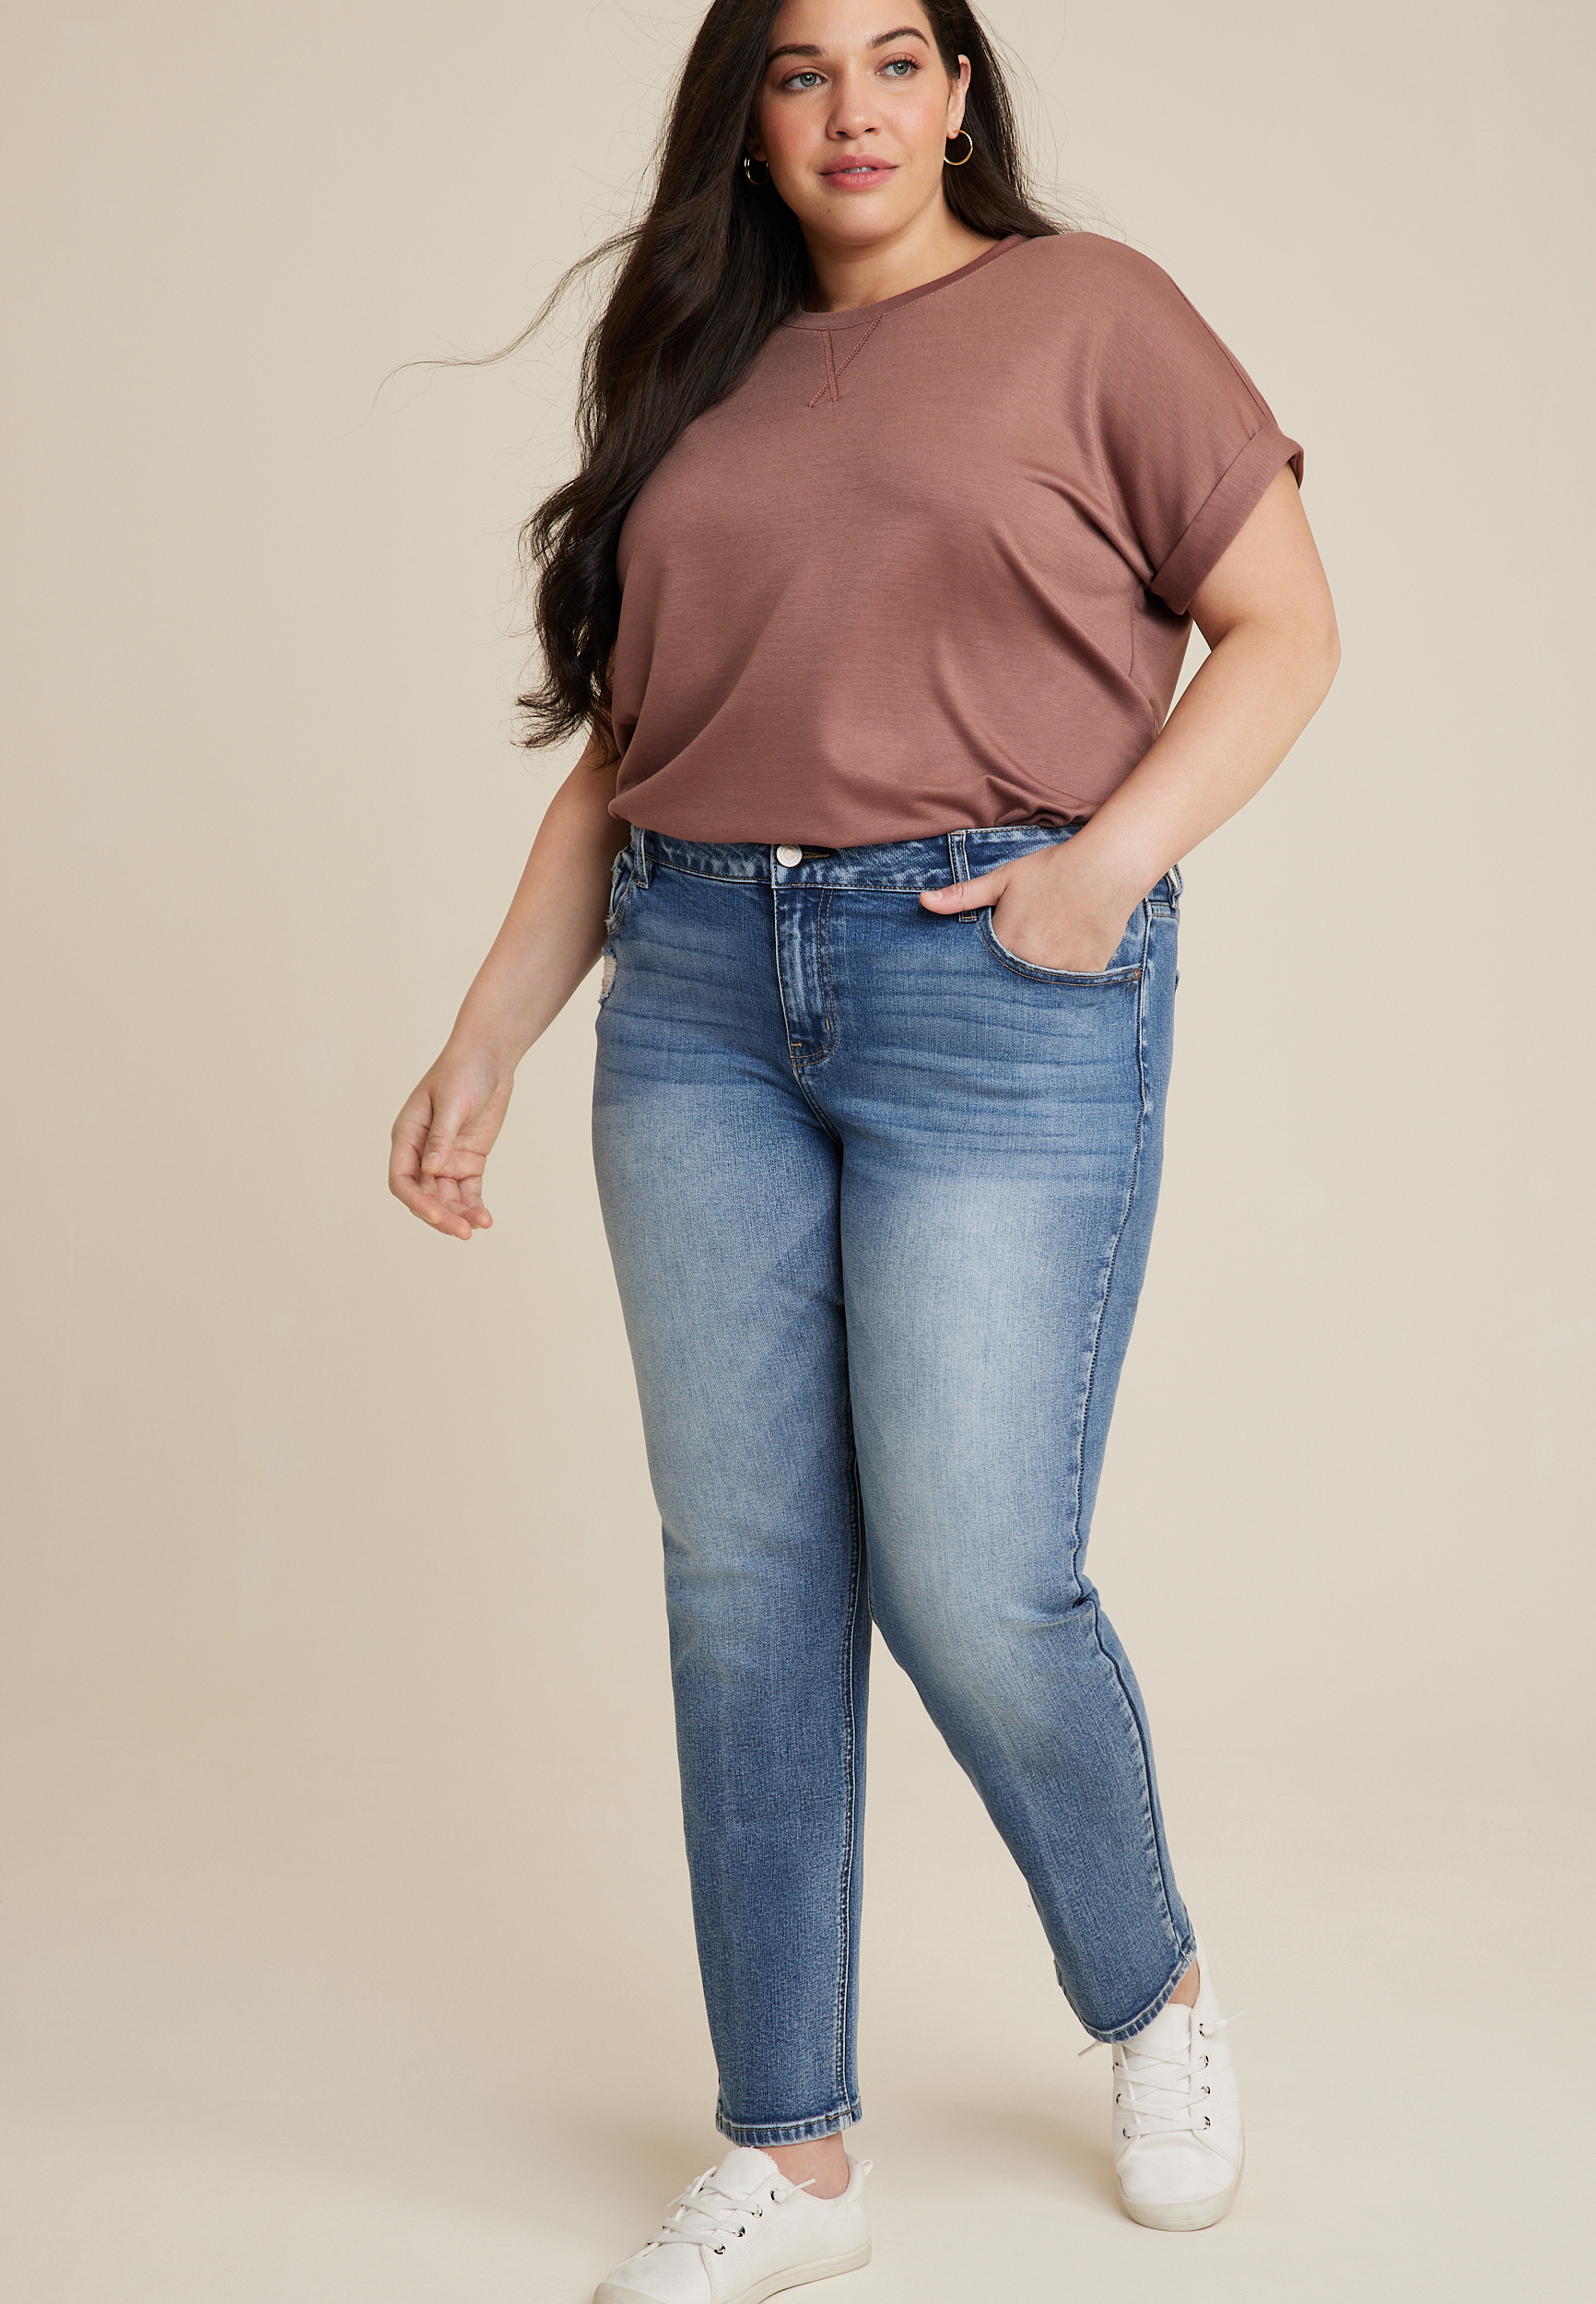 High Waist Plus Size Skinny Capris: Stretchy Knee Length Mom Jeans Short  Length For Women, Perfect For Summer 210428 From Bai06, $20.35